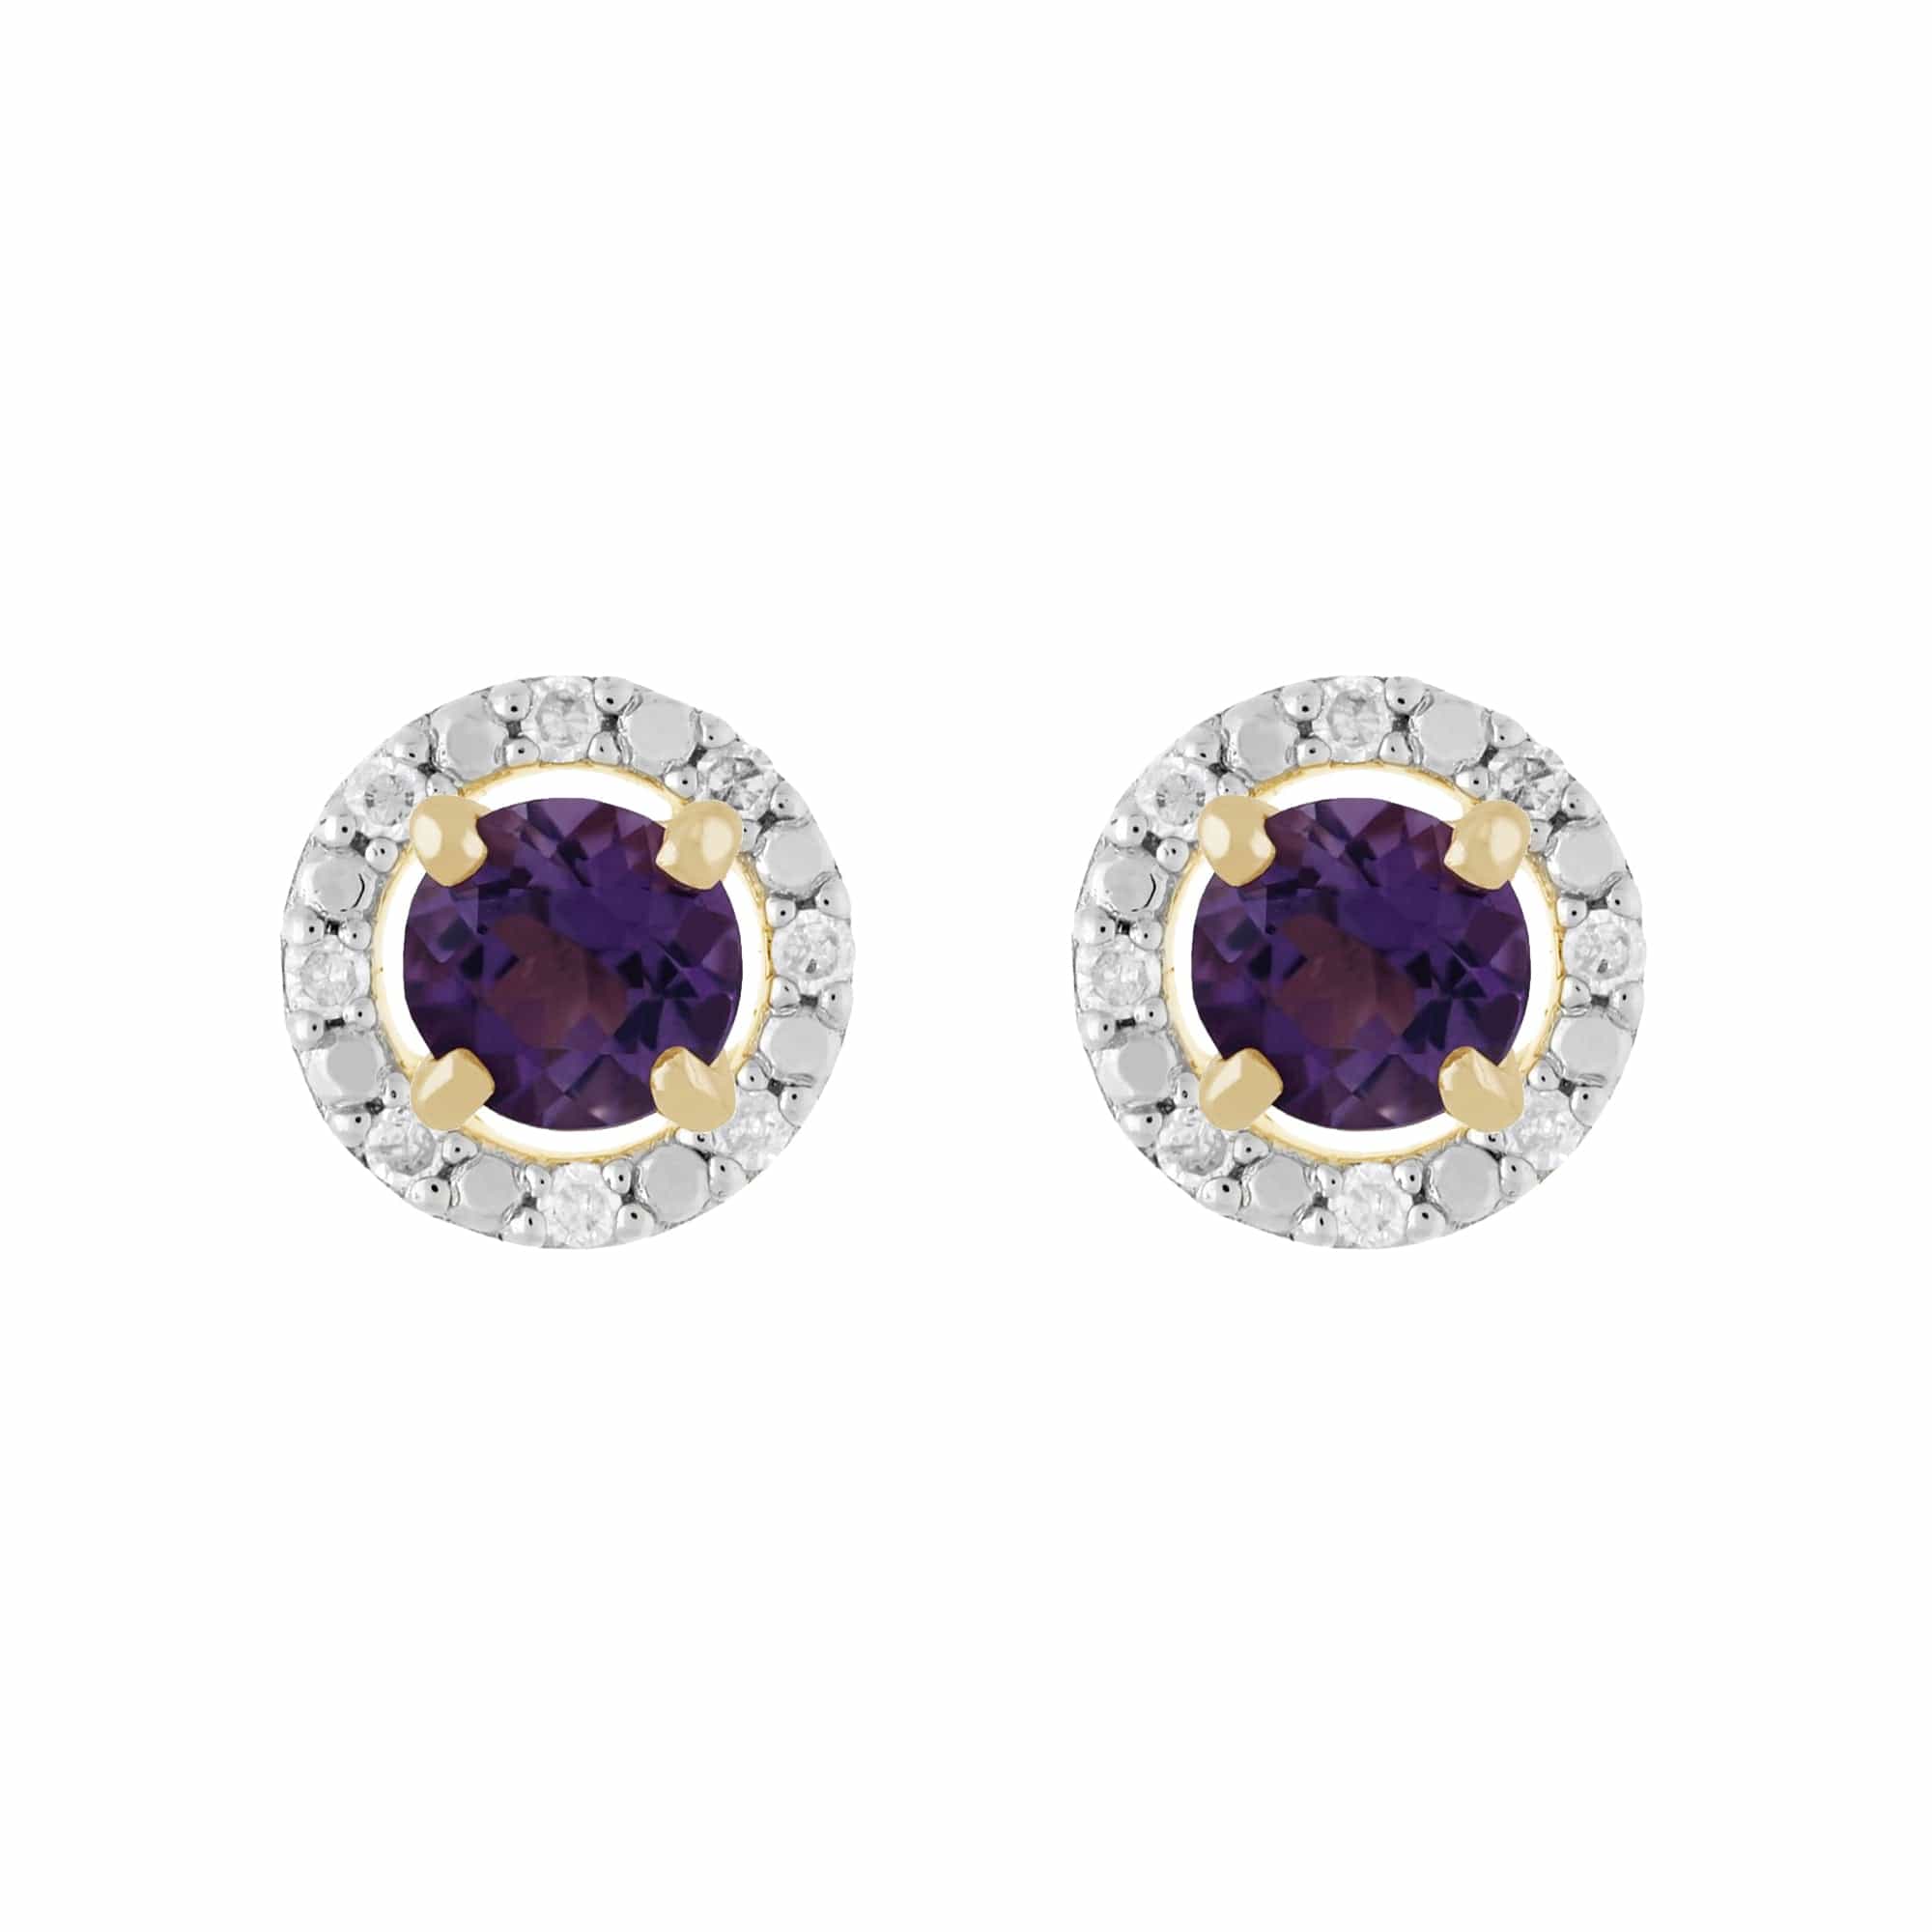 11560-191E0376019 Classic Round Amethyst Stud Earrings with Detachable Diamond Round Earrings Jacket Set in 9ct Yellow Gold 1